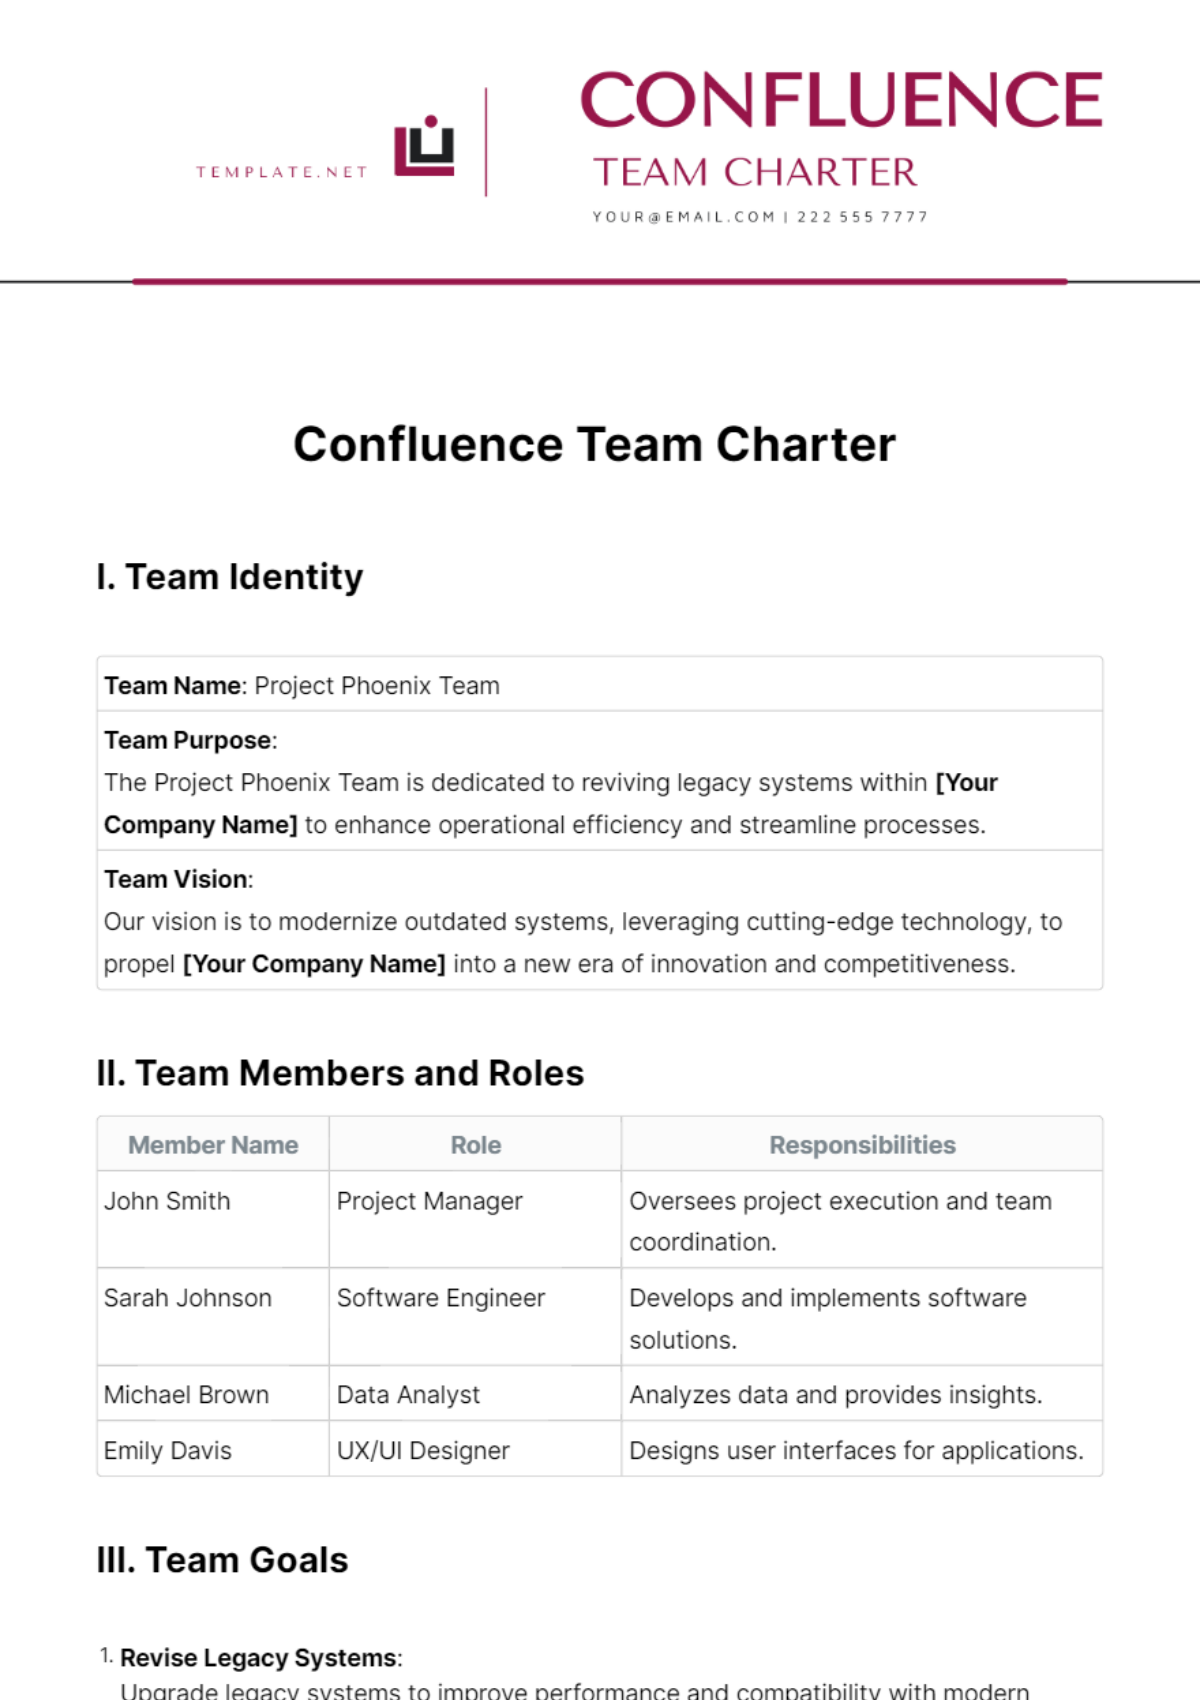 Free Confluence Team Charter Template